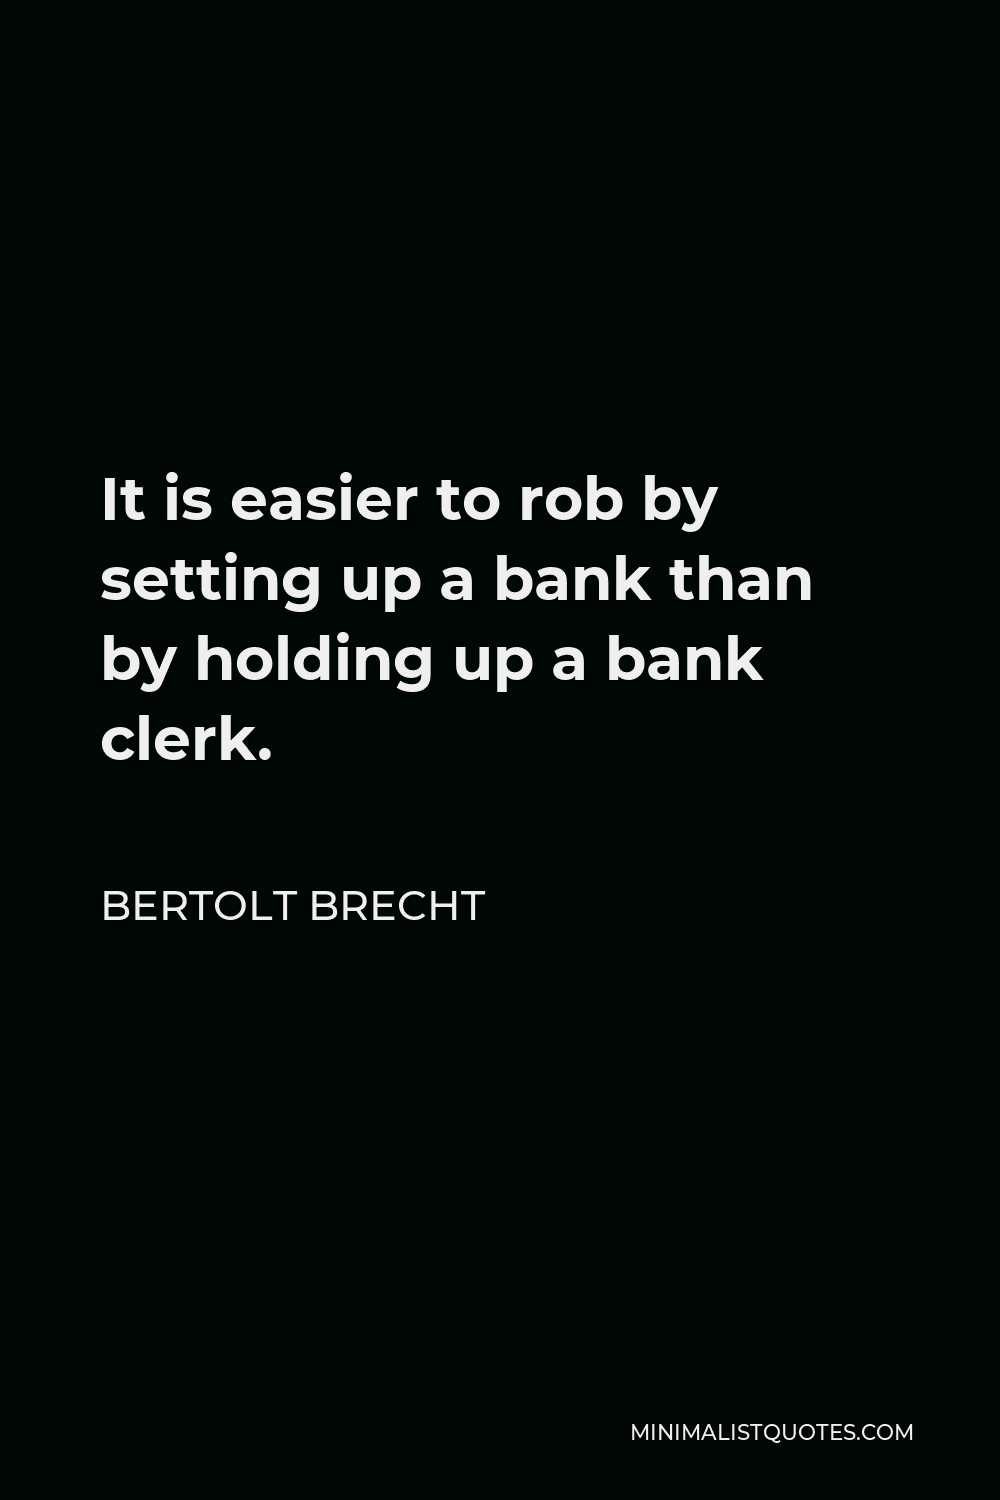 Bertolt Brecht Quote - It is easier to rob by setting up a bank than by holding up a bank clerk.